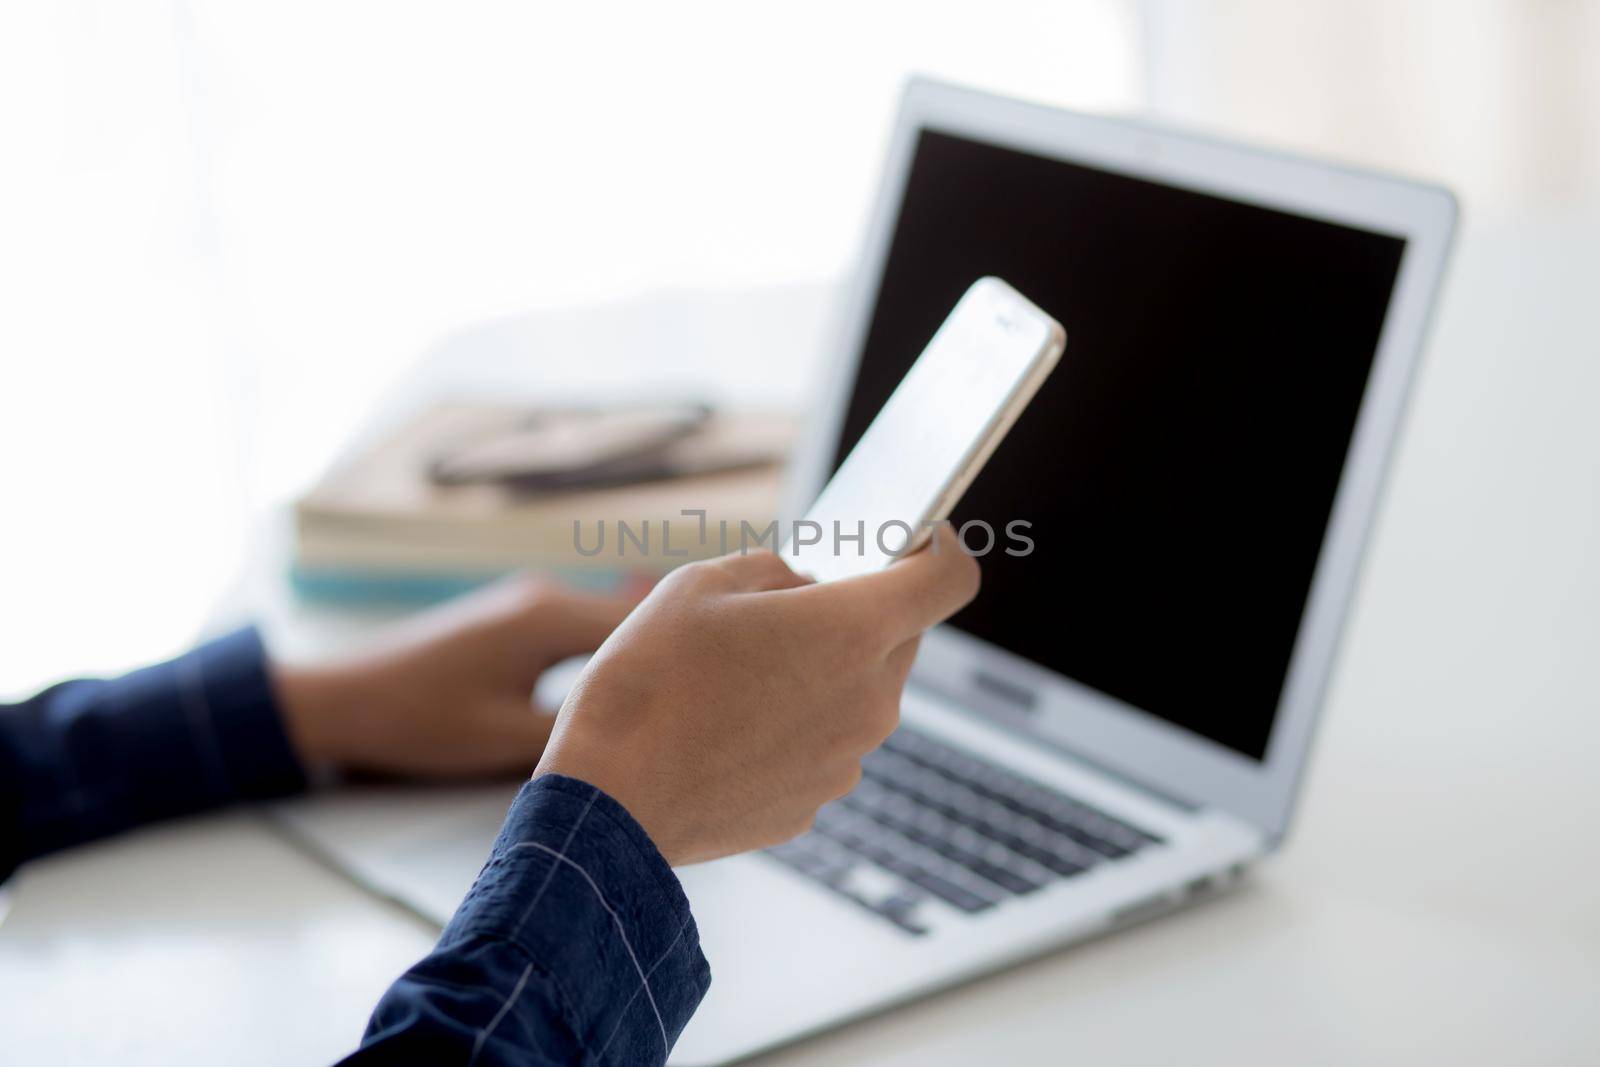 Hand of young man working with laptop computer and smartphone mockup on desk at home, notebook and phone display blank screen, freelance look message to internet, business and communication concept.